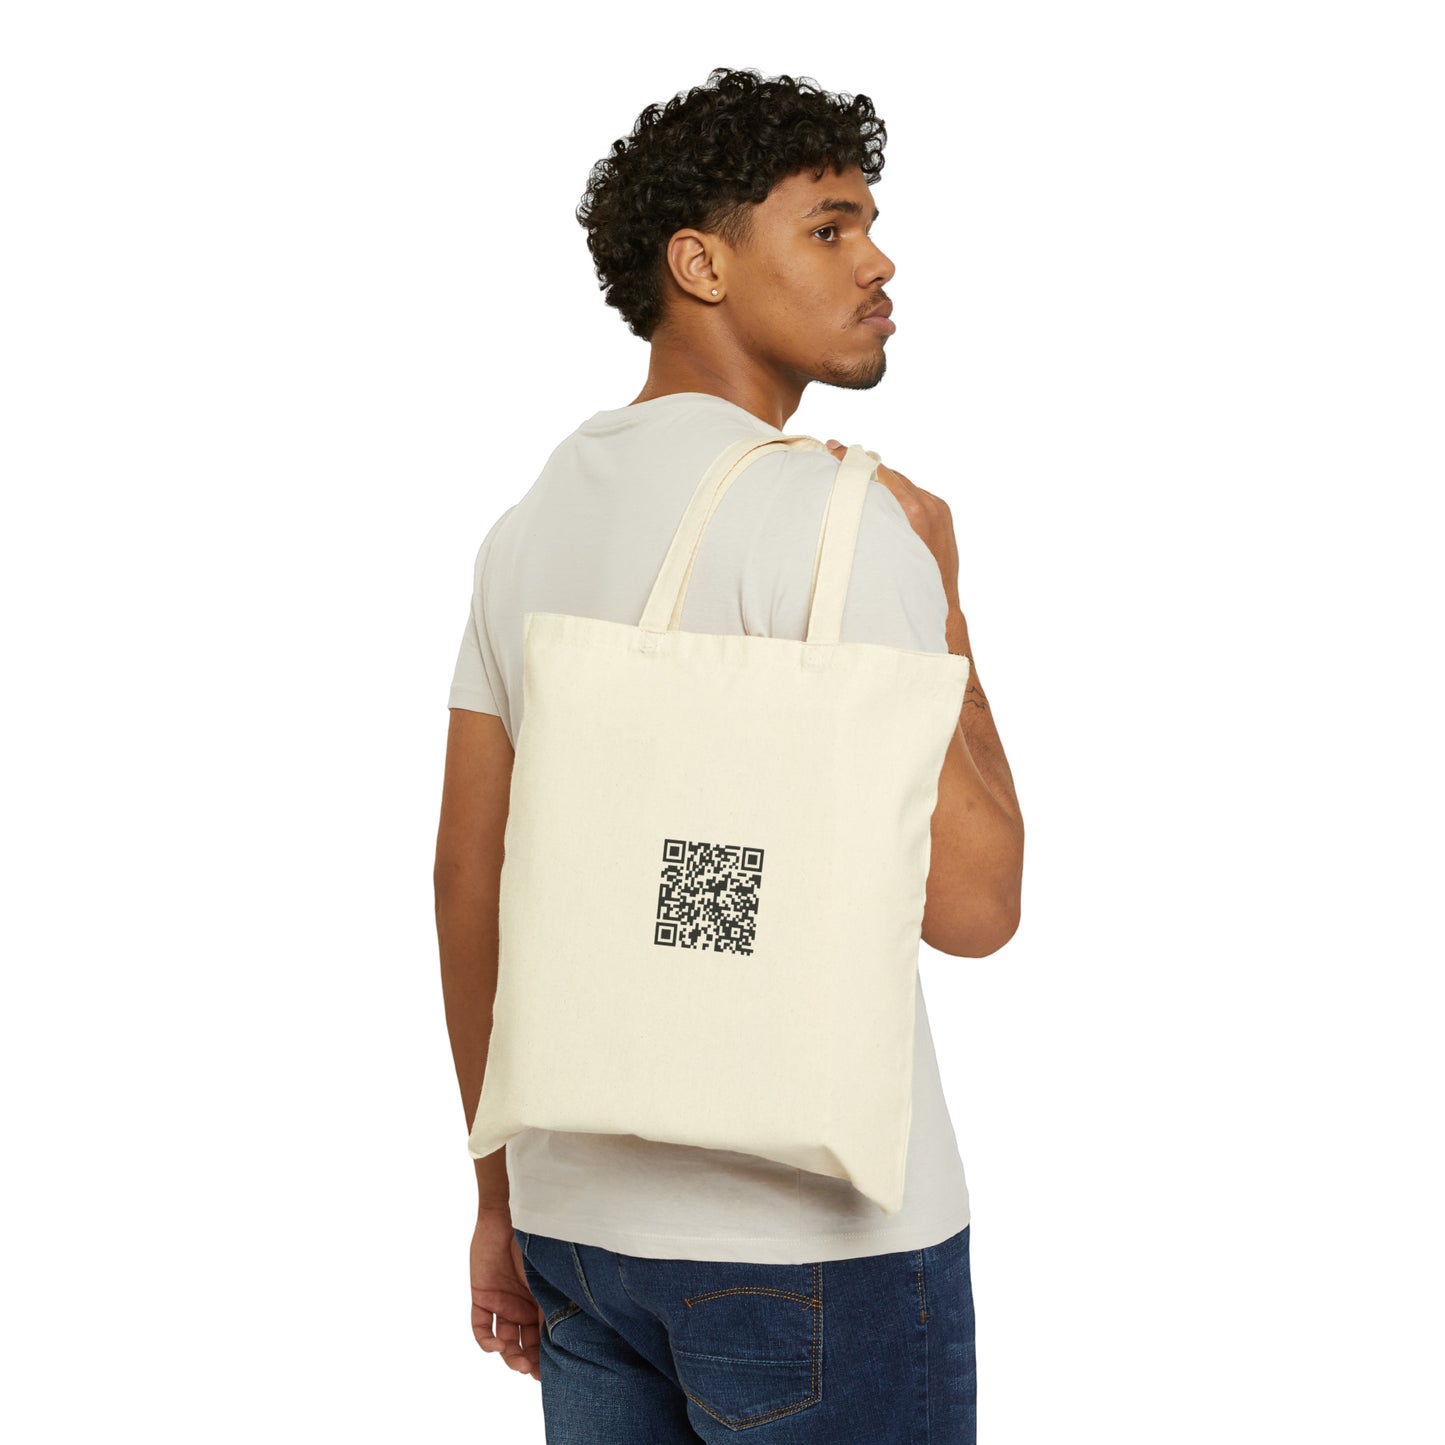 The Art of Effective Dreaming - Cotton Canvas Tote Bag